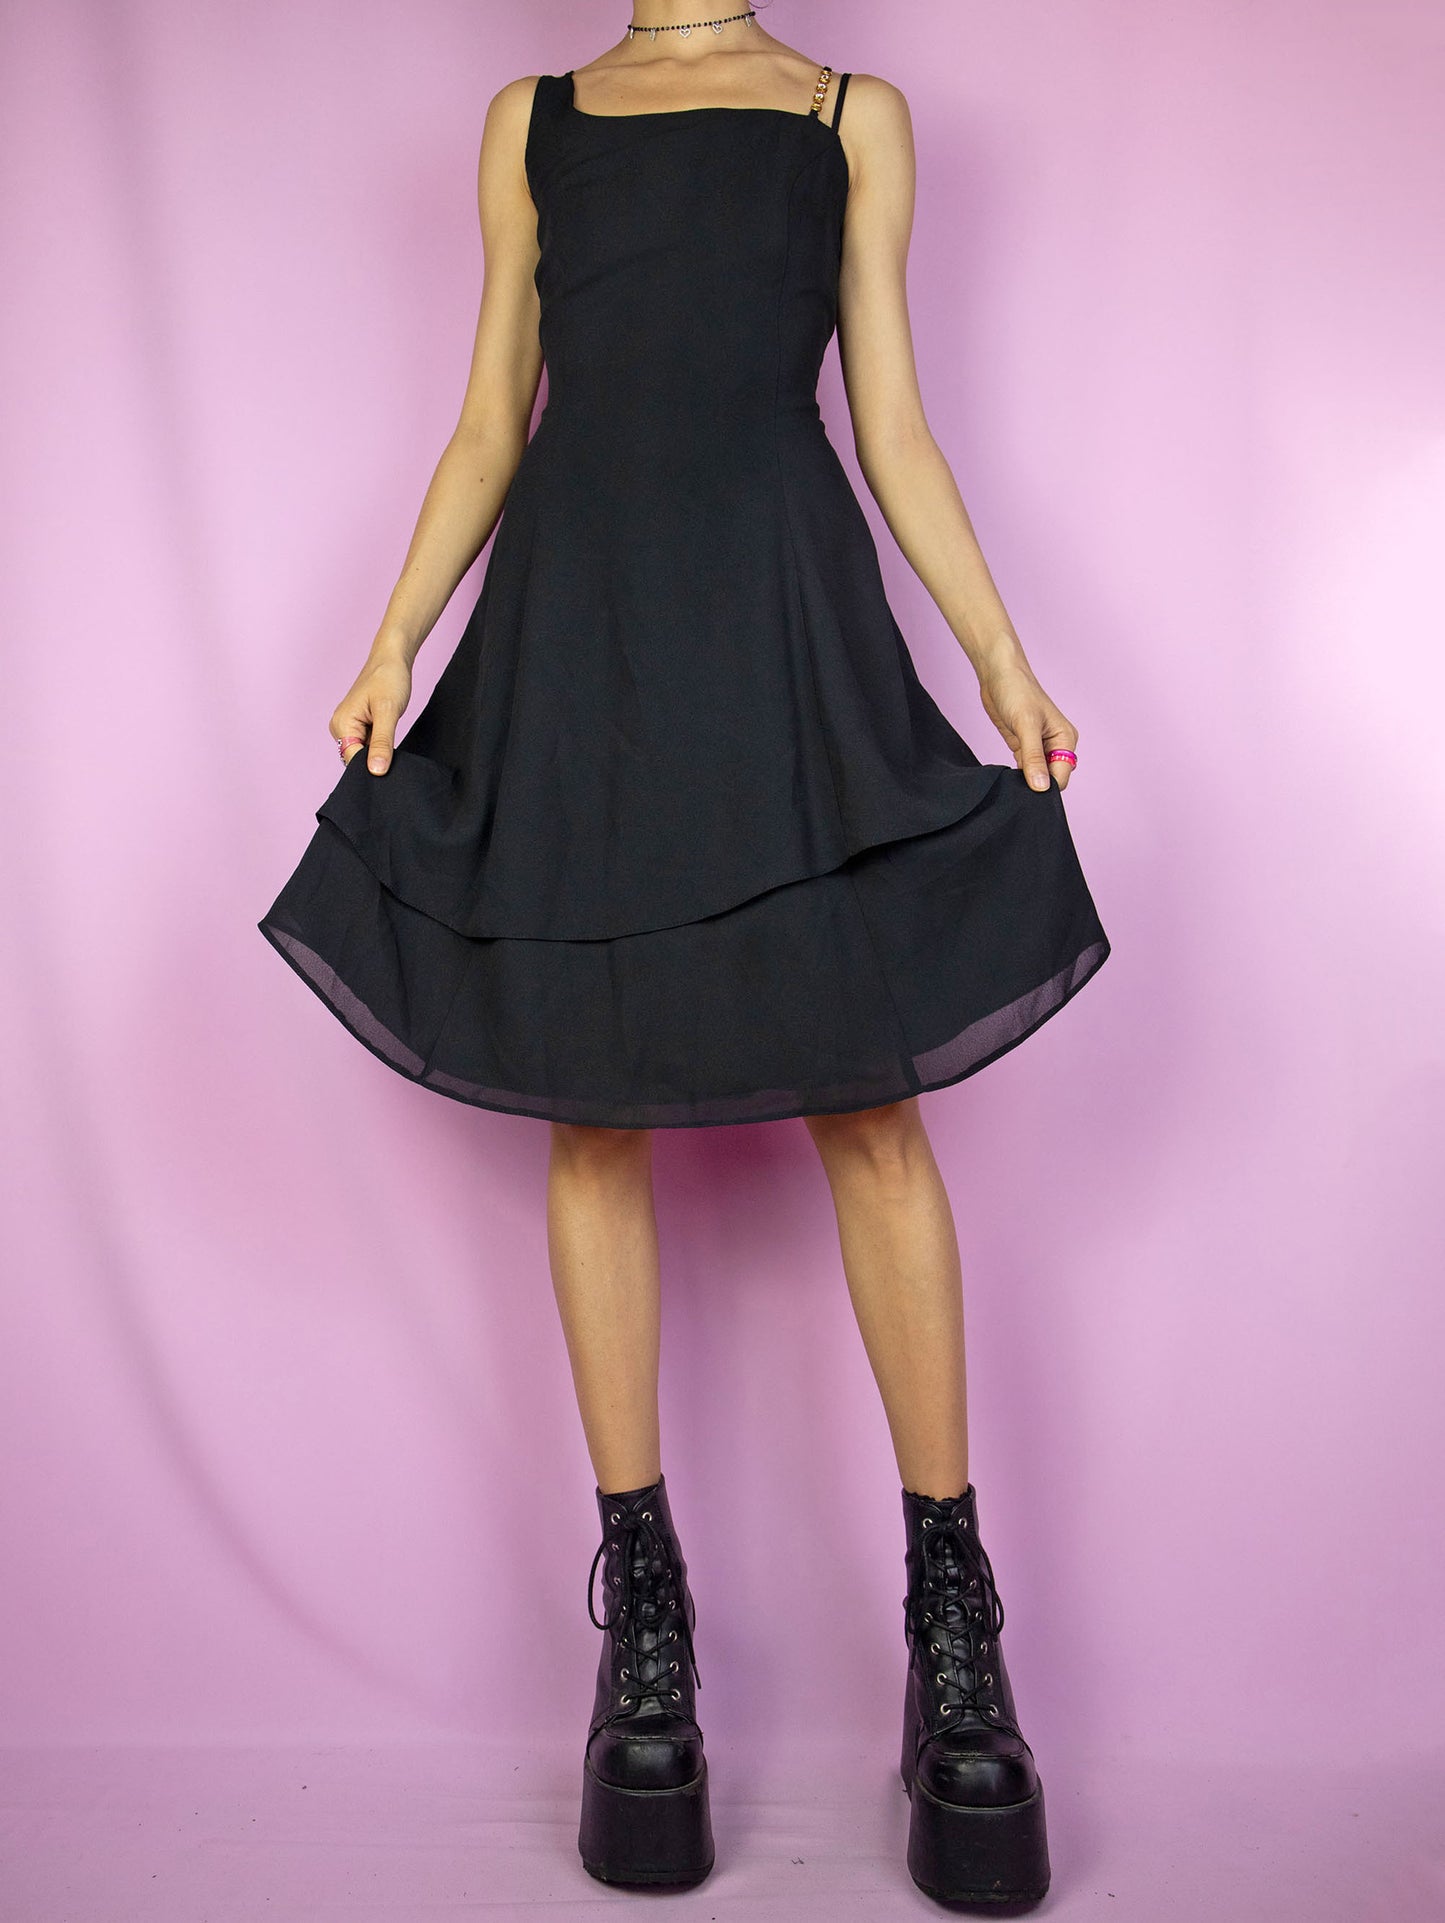 The Vintage 90s Black Asymmetric Layered Dress is an elegant cocktail party mini dress with double straps, rhinestone detailing and back zip closure.